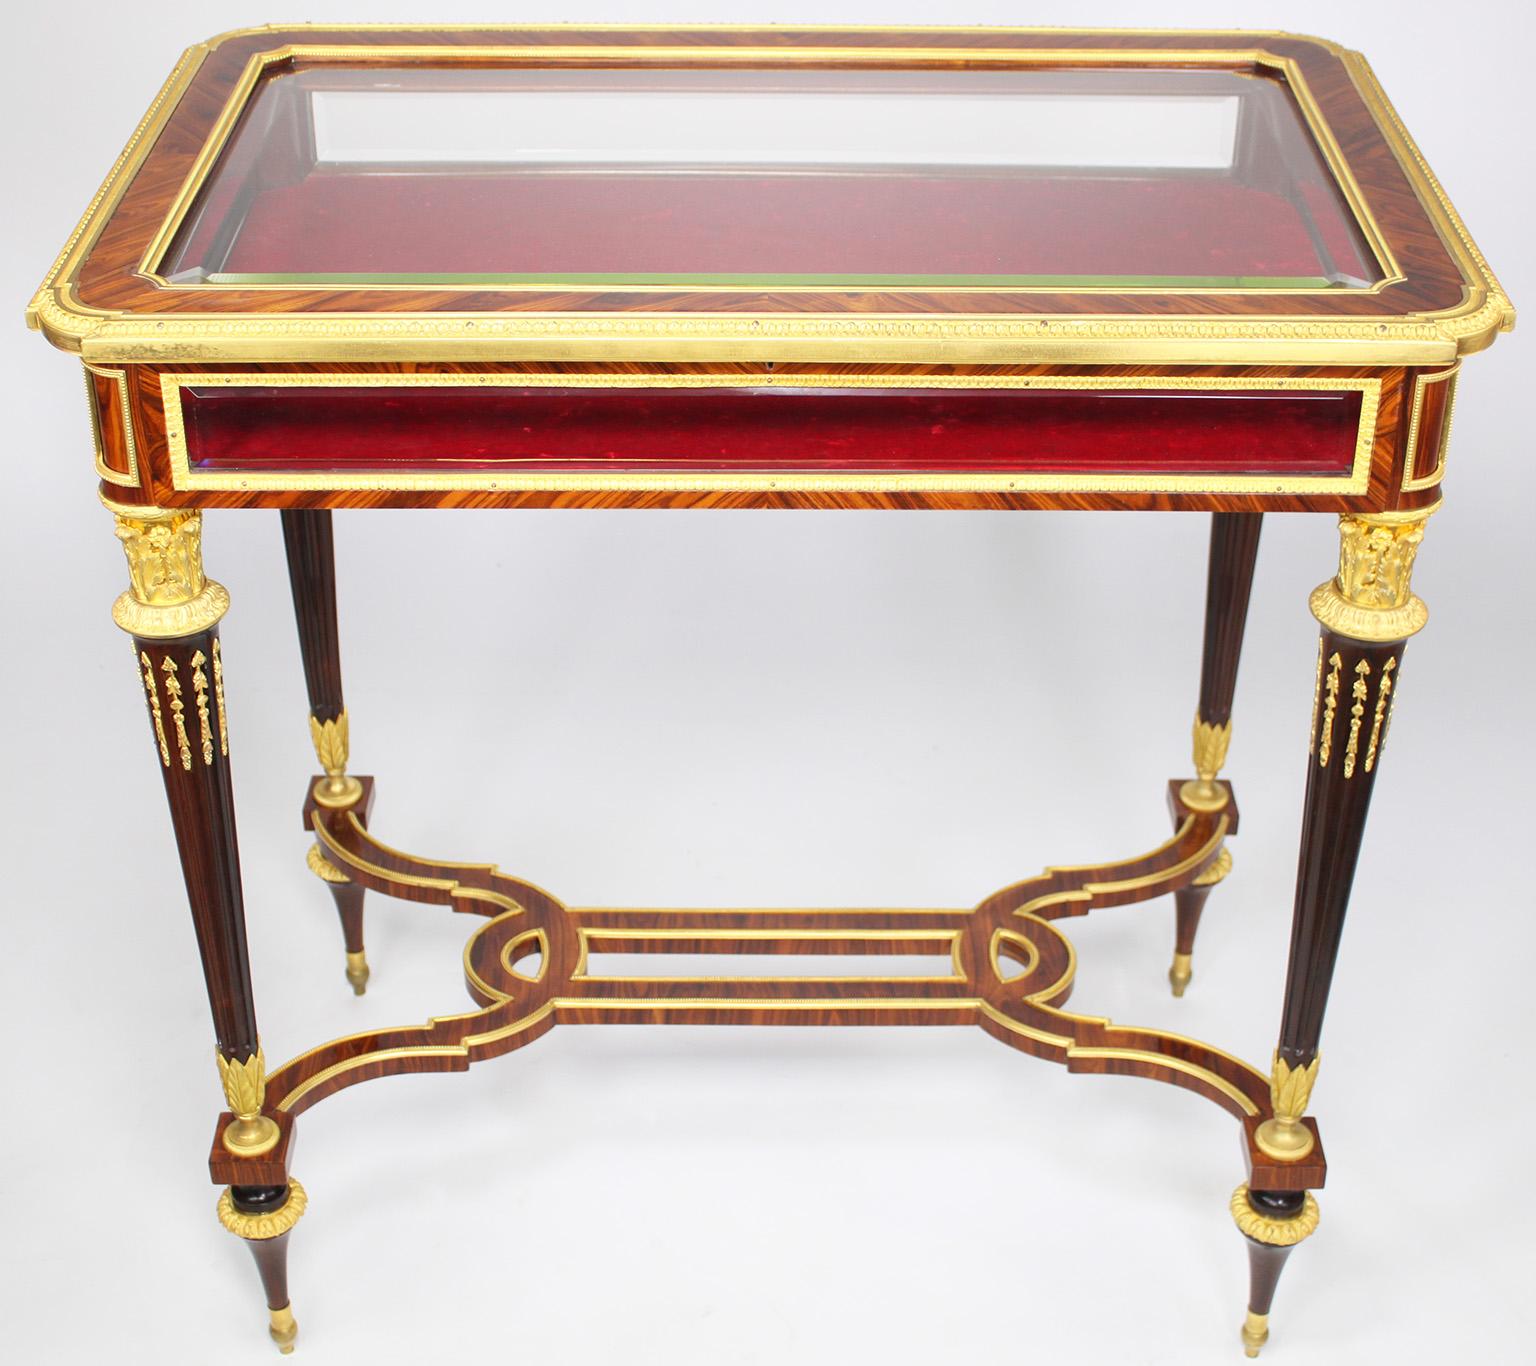 A Superb Quality French 19th Century Louis XVI Style Ormolu Mounted Mahogany and Kingwood Vitrine Table, Attributed to Henry Dasson (French, 1825-1896), with a beveled glass lift top and lined interior, fluted tapered legs and a shaped stretcher